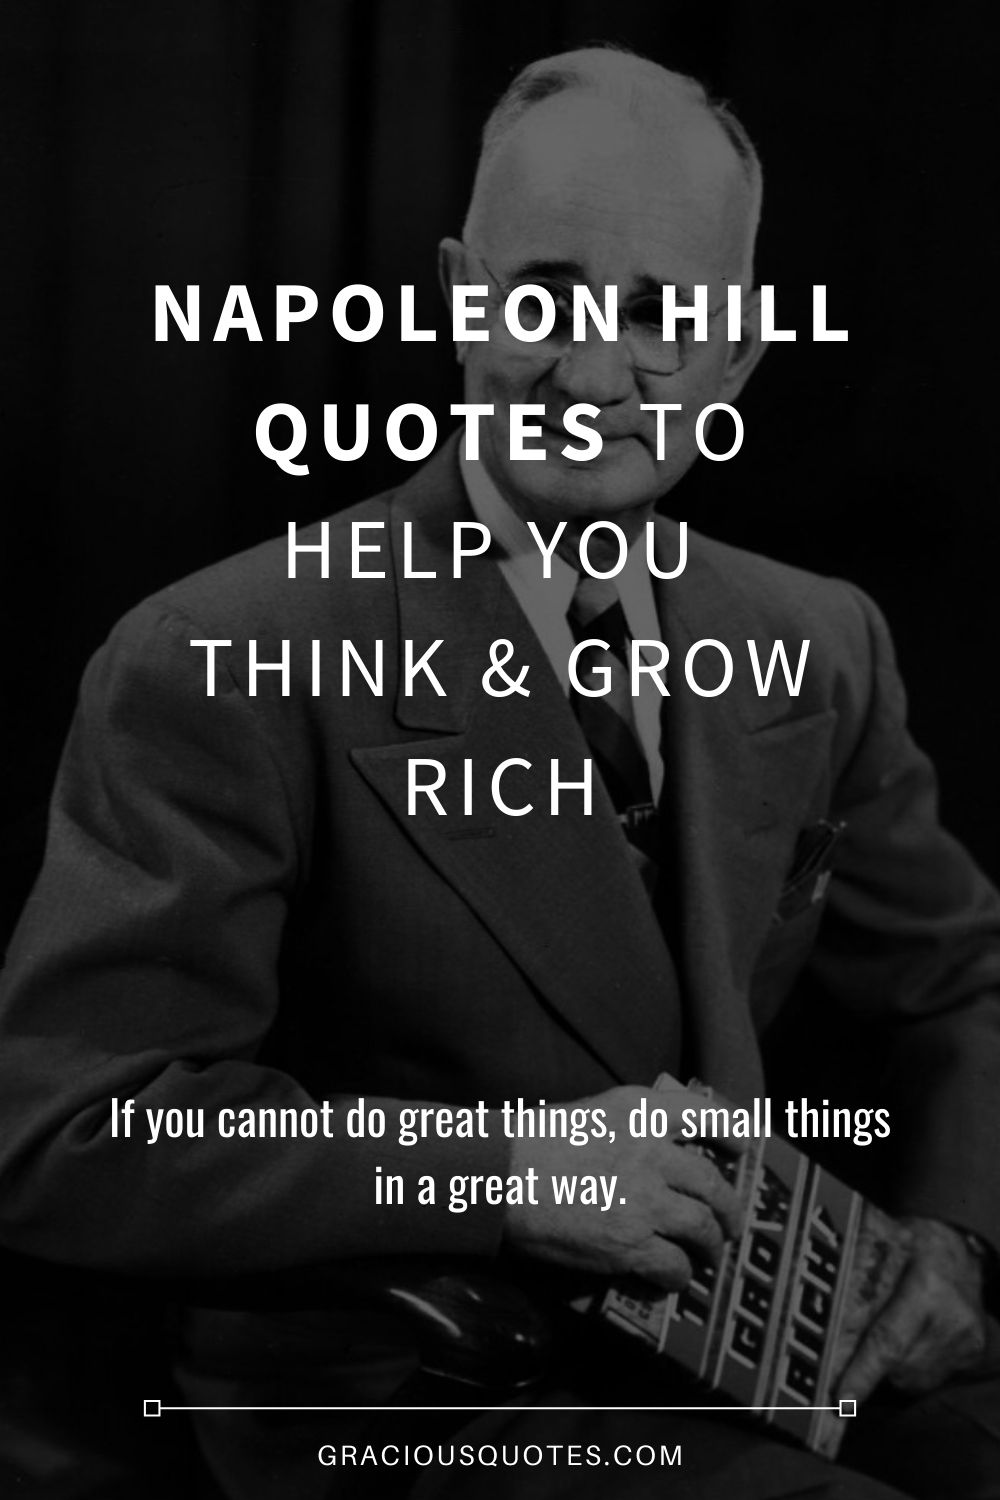 Napoleon-Hill-Quotes-to-Help-You-Think-Grow-Rich-Gracious-Quotes